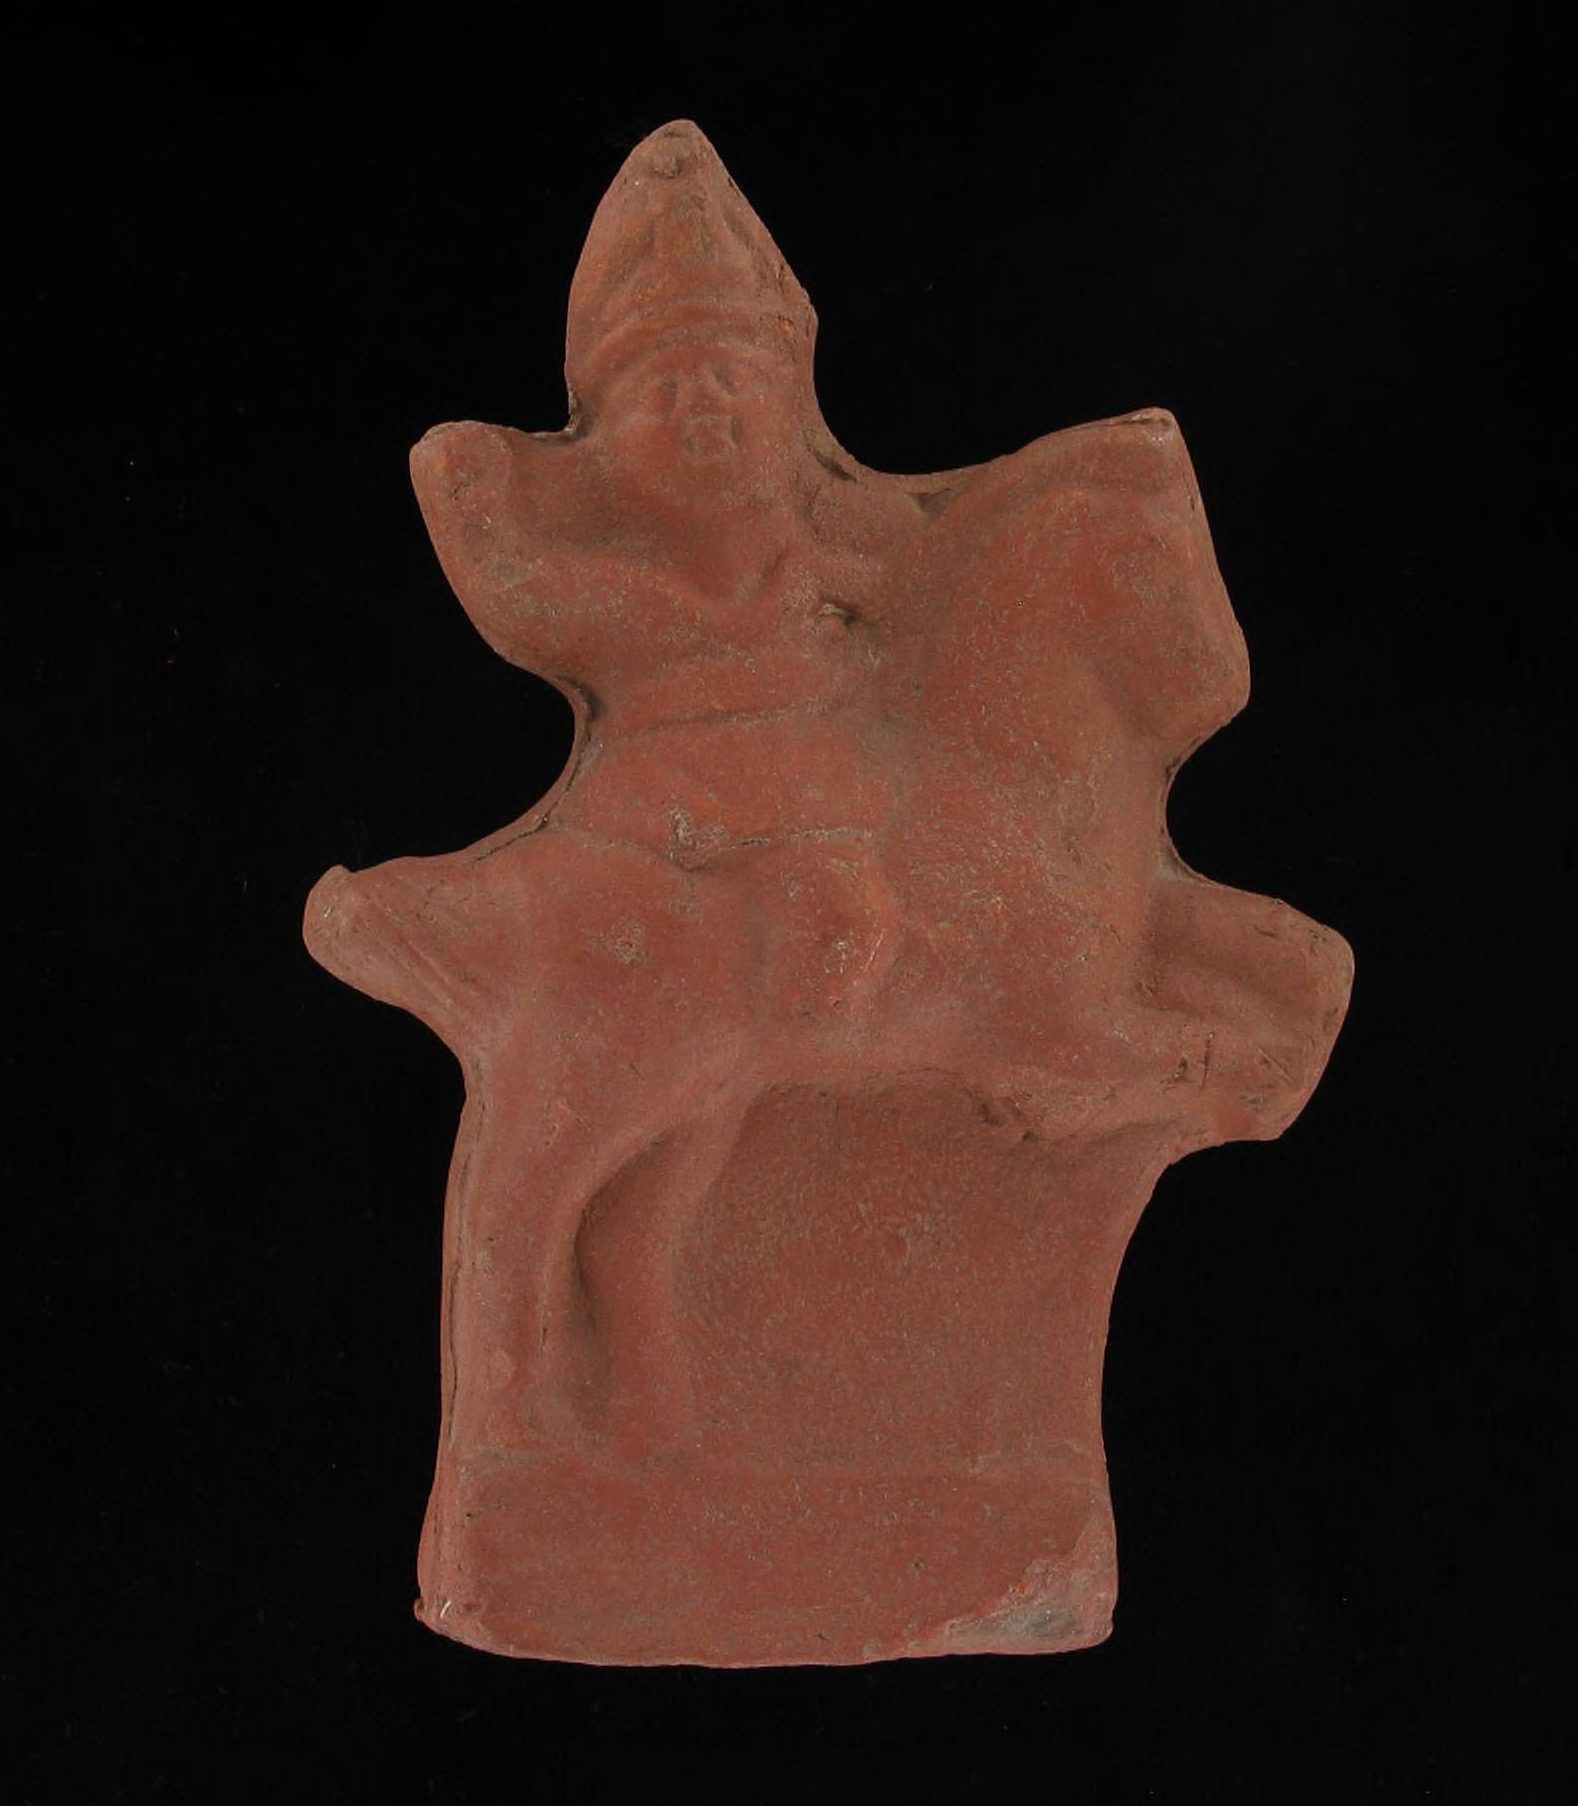 A red clay artifact against a black background. The figurine wears a helmet, lifts a hand aloft, and rides a horse with raised forelegs.